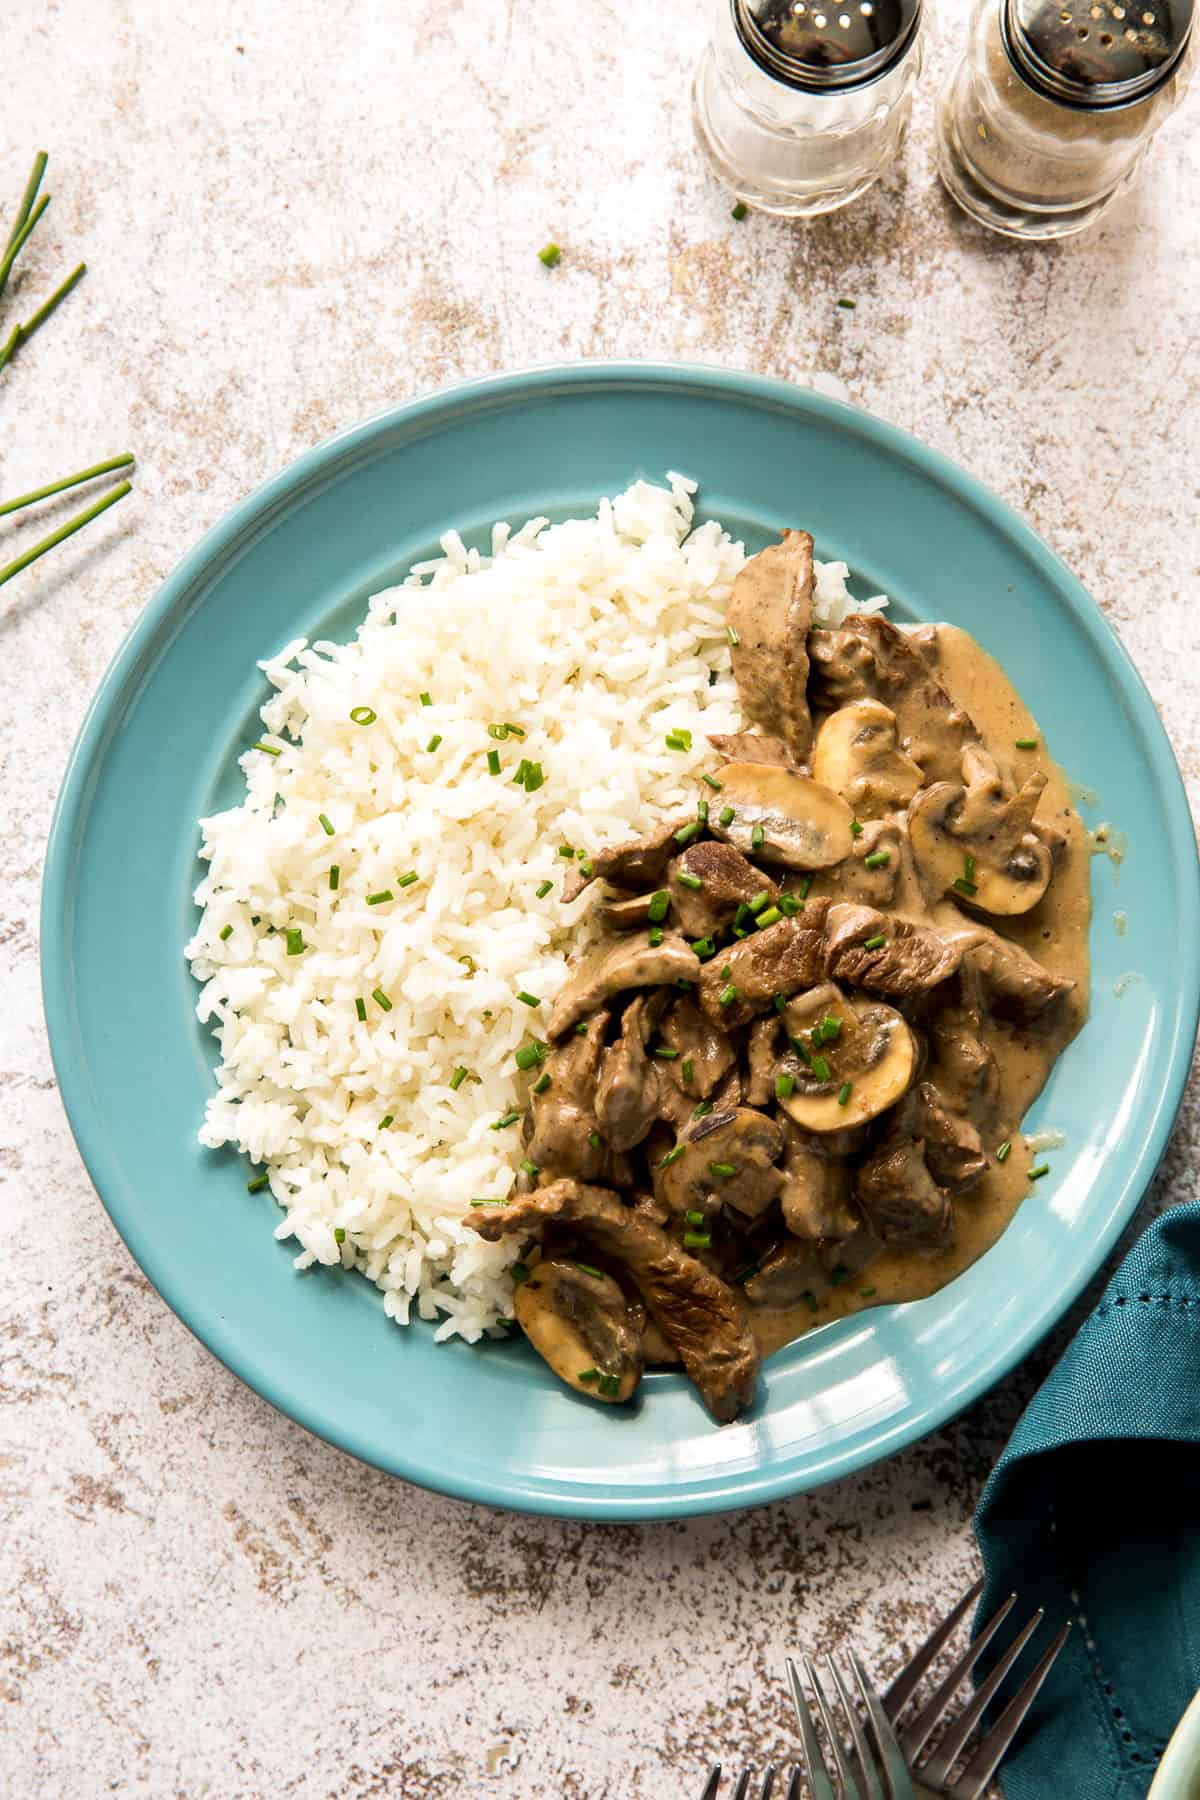 Beef stroganoff with mushrooms and wh white rice on a blue plate next to salt and pepper shakers.